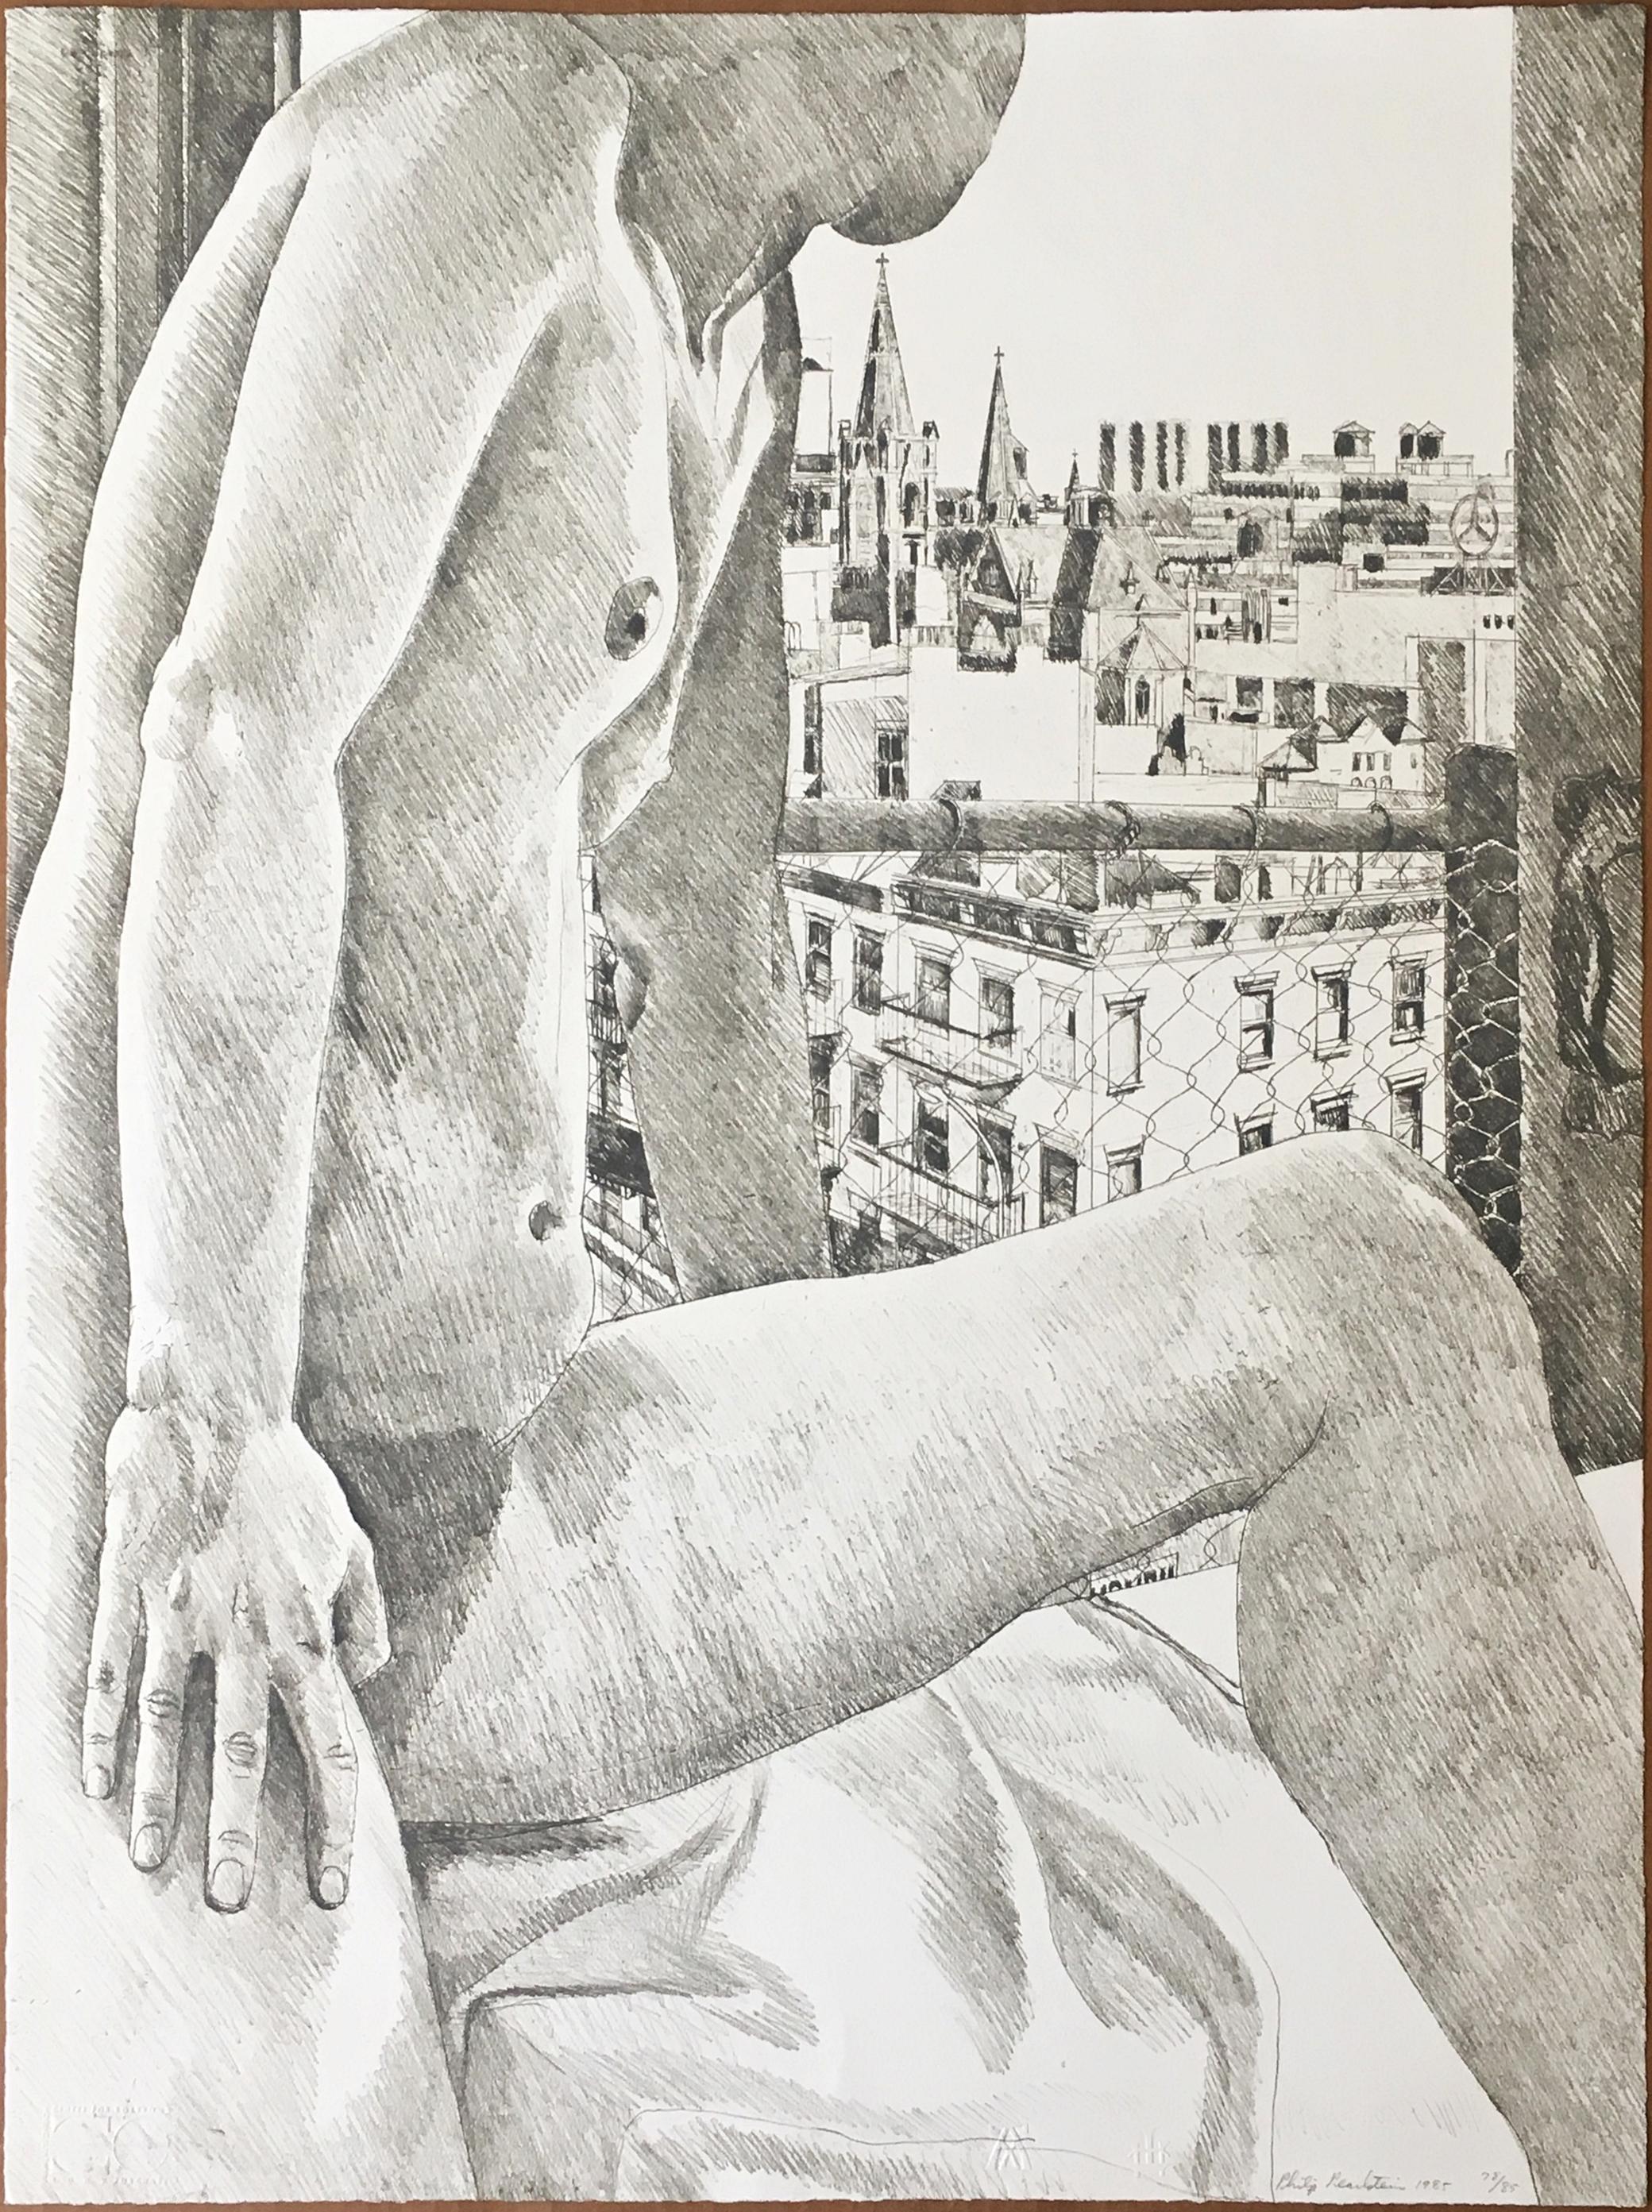 Philip Pearlstein Figurative Print - Untitled Nude, from Atelier International Portfolio by renowned realist artist